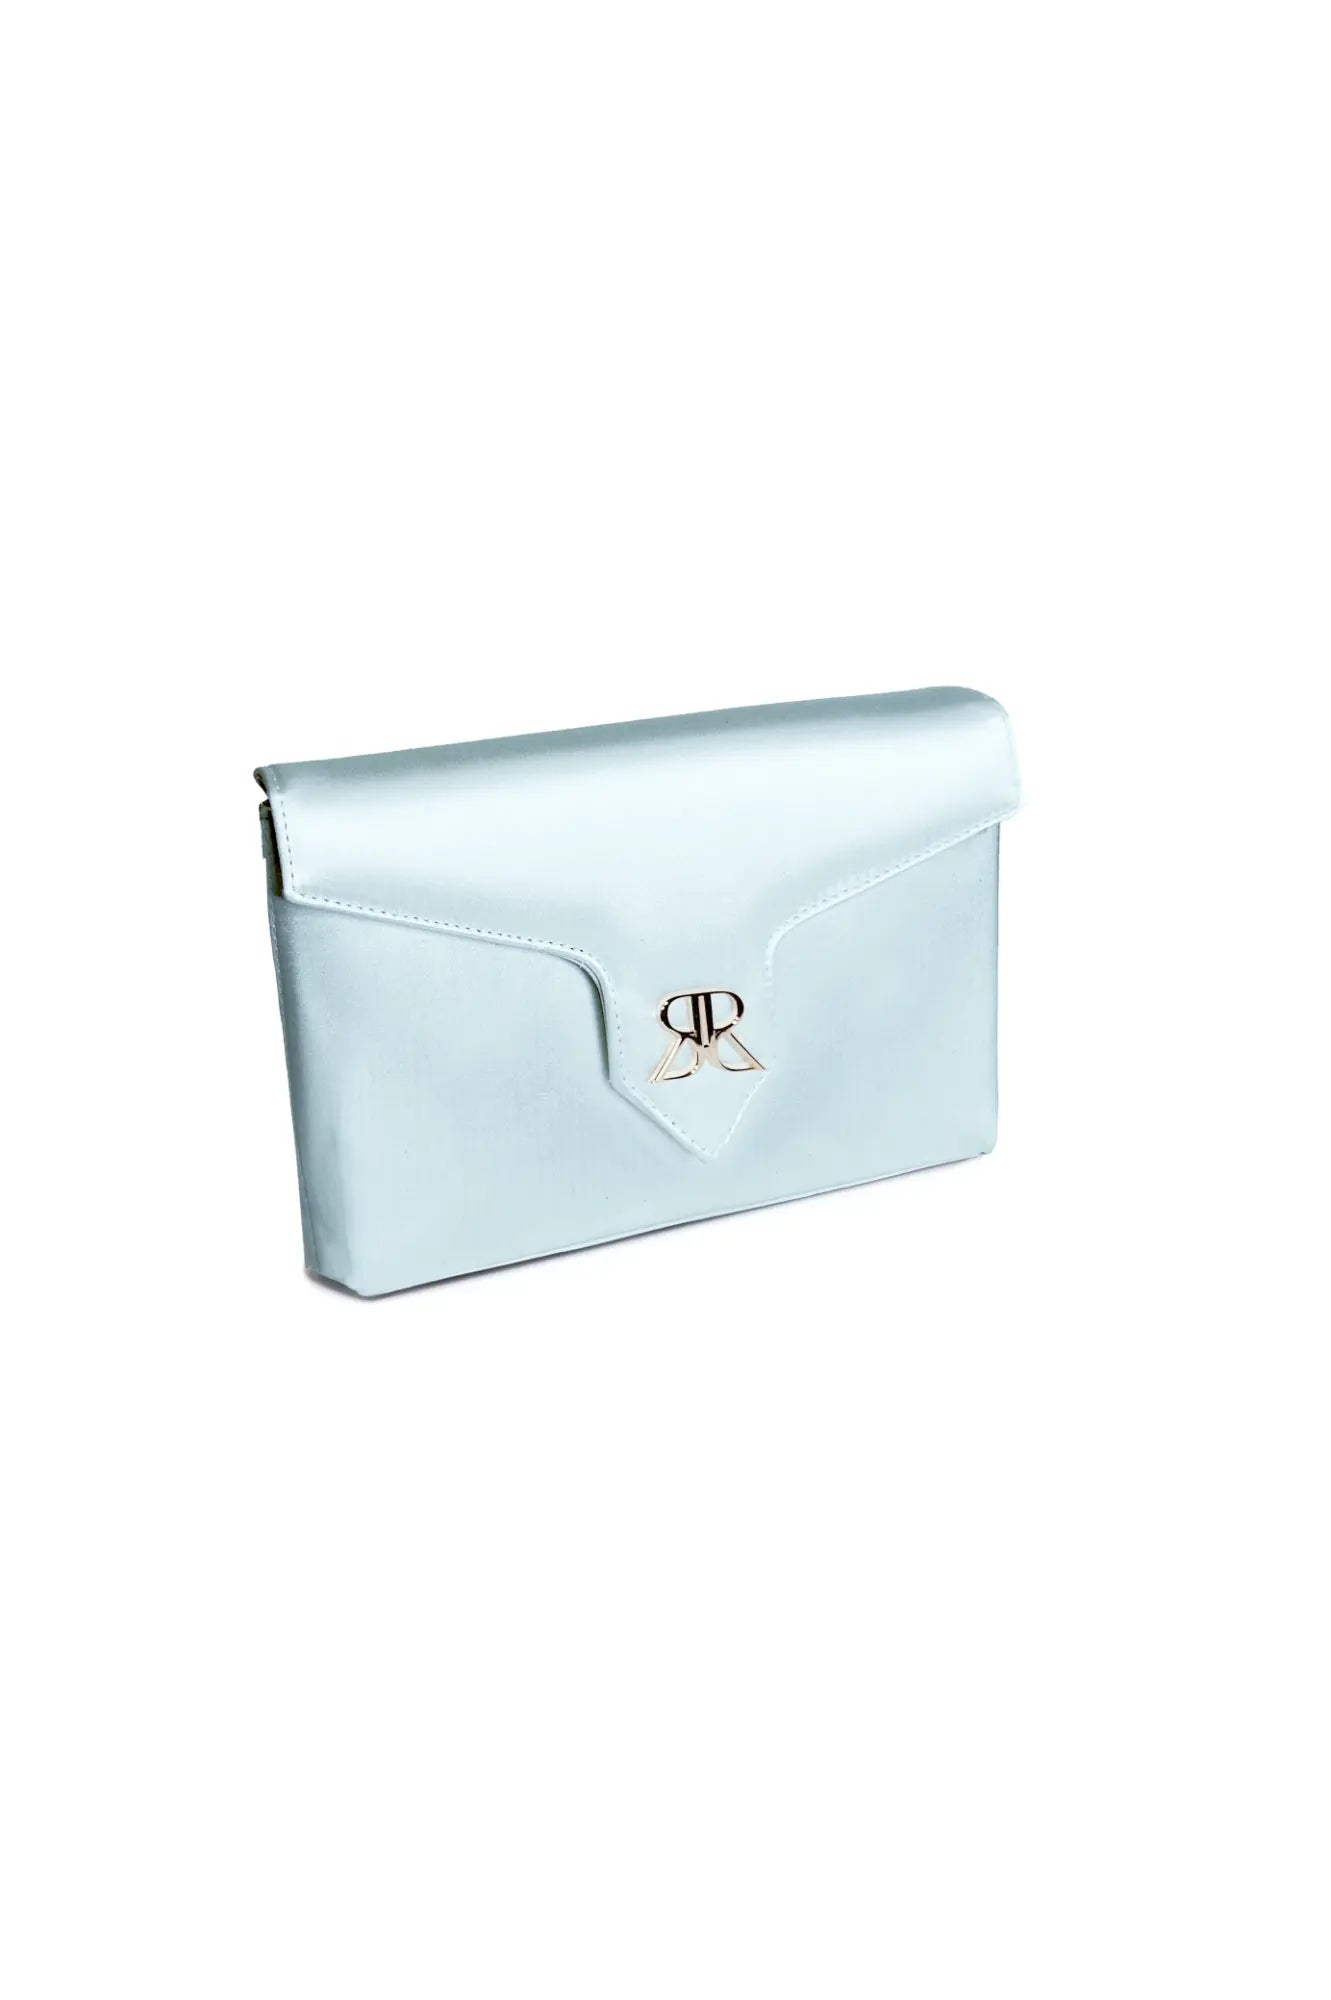 Love Note Envelope Clutch Cinderella Blue by The Bella Rosa Collection, with a front flap and metallic clasp, perfect for elegant evenings.